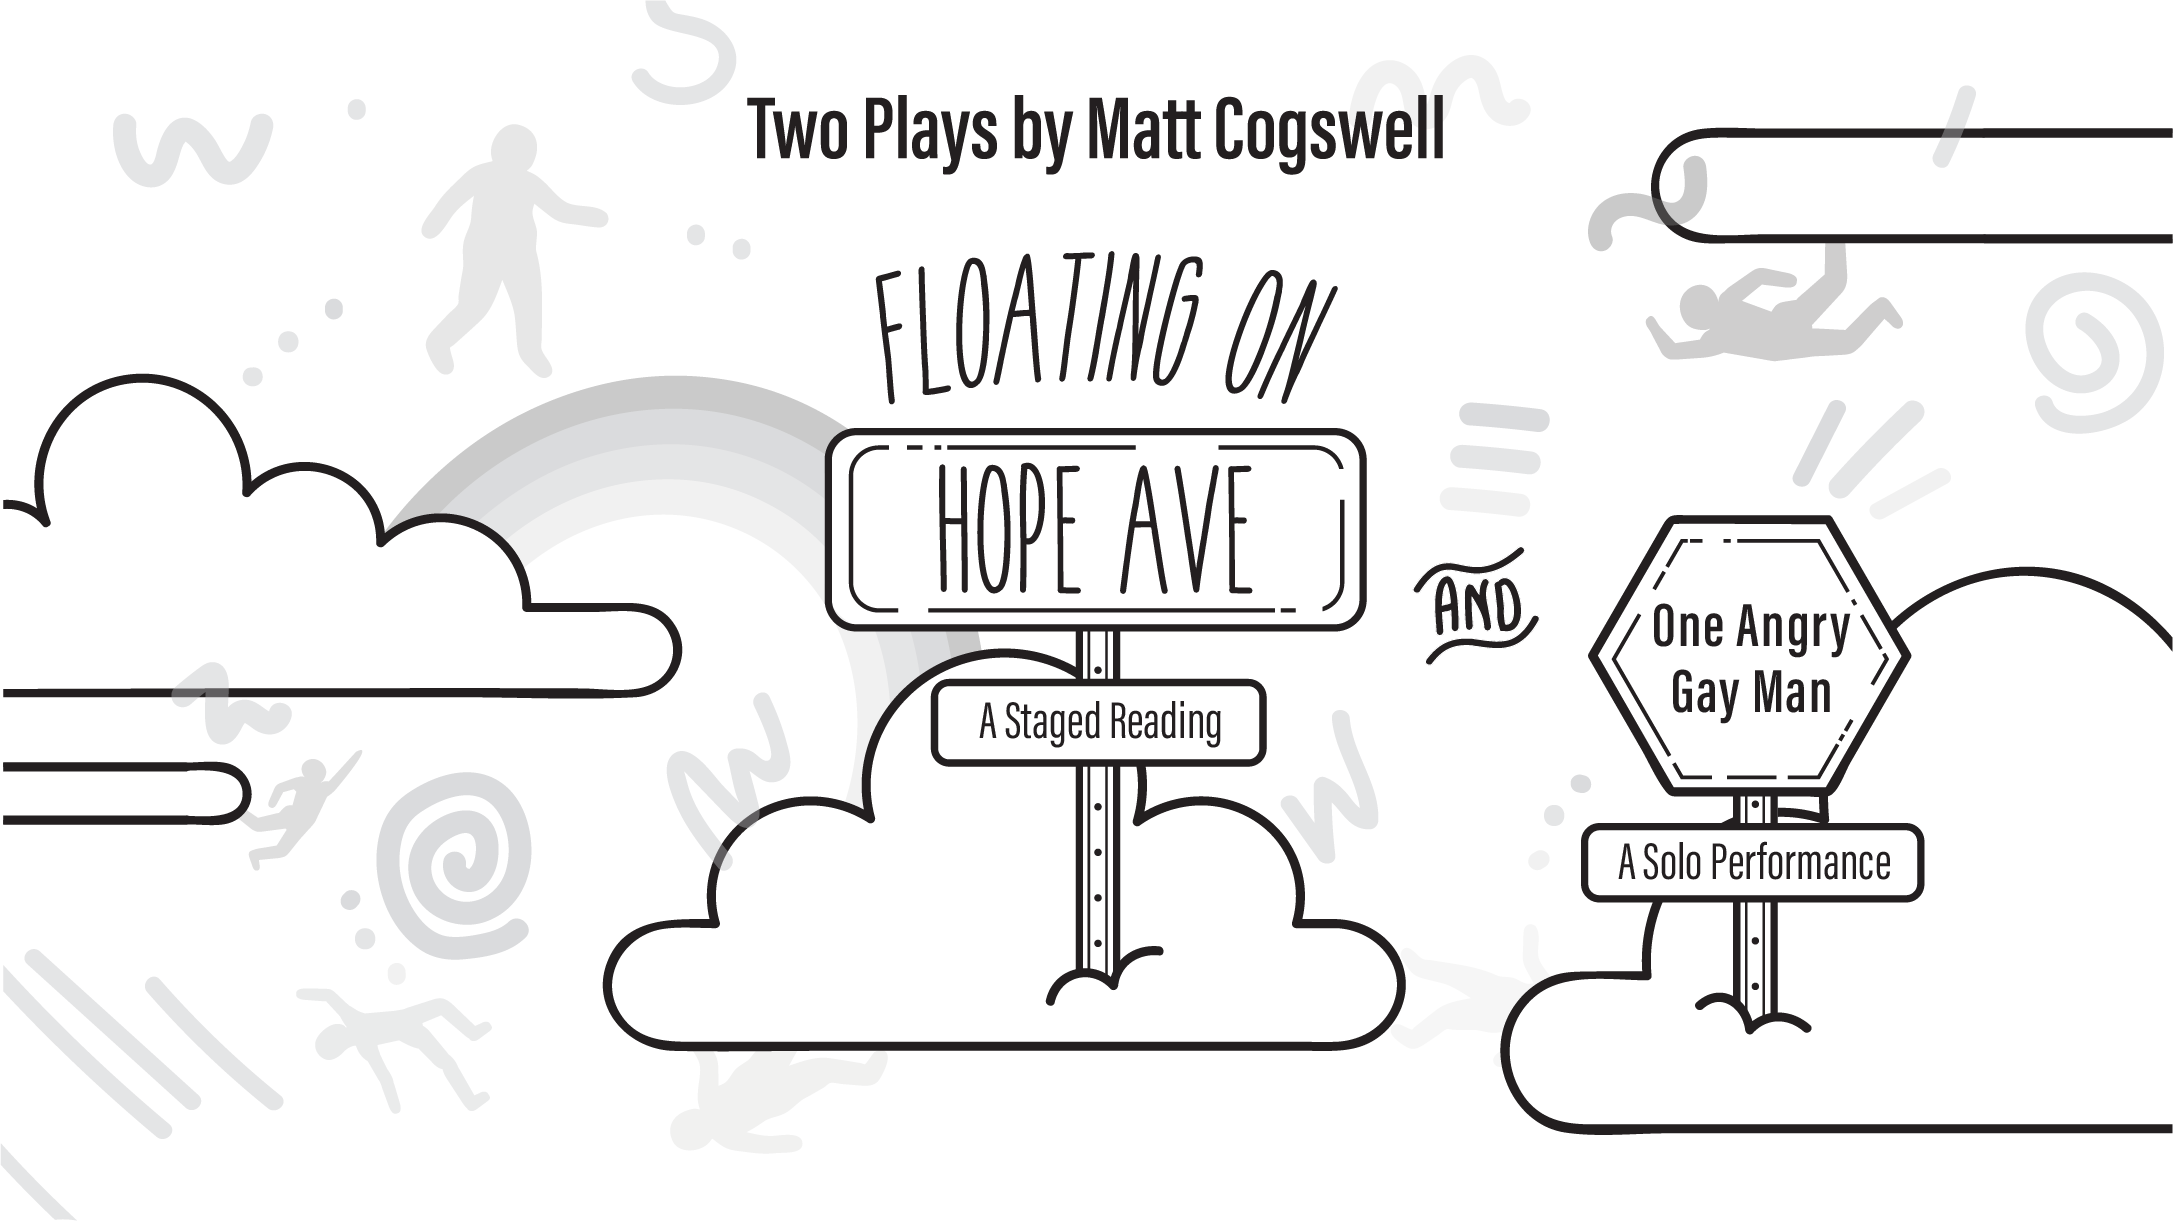 floating on hope ave event photo.png